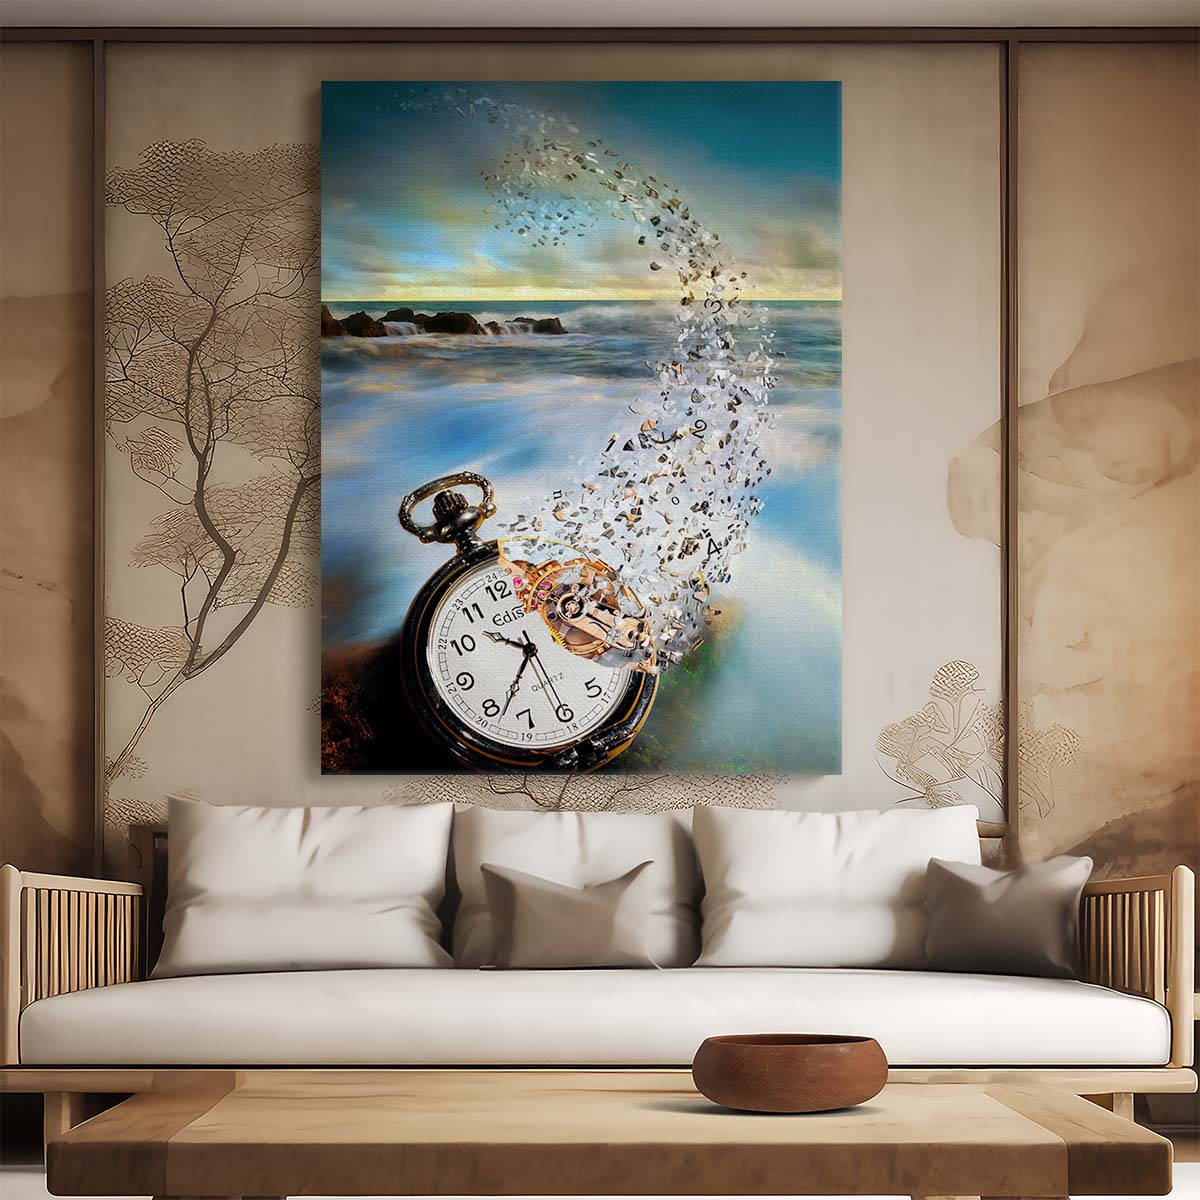 Surreal Time Vanishing Photography Art by Sandy Wijaya by Luxuriance Designs, made in USA